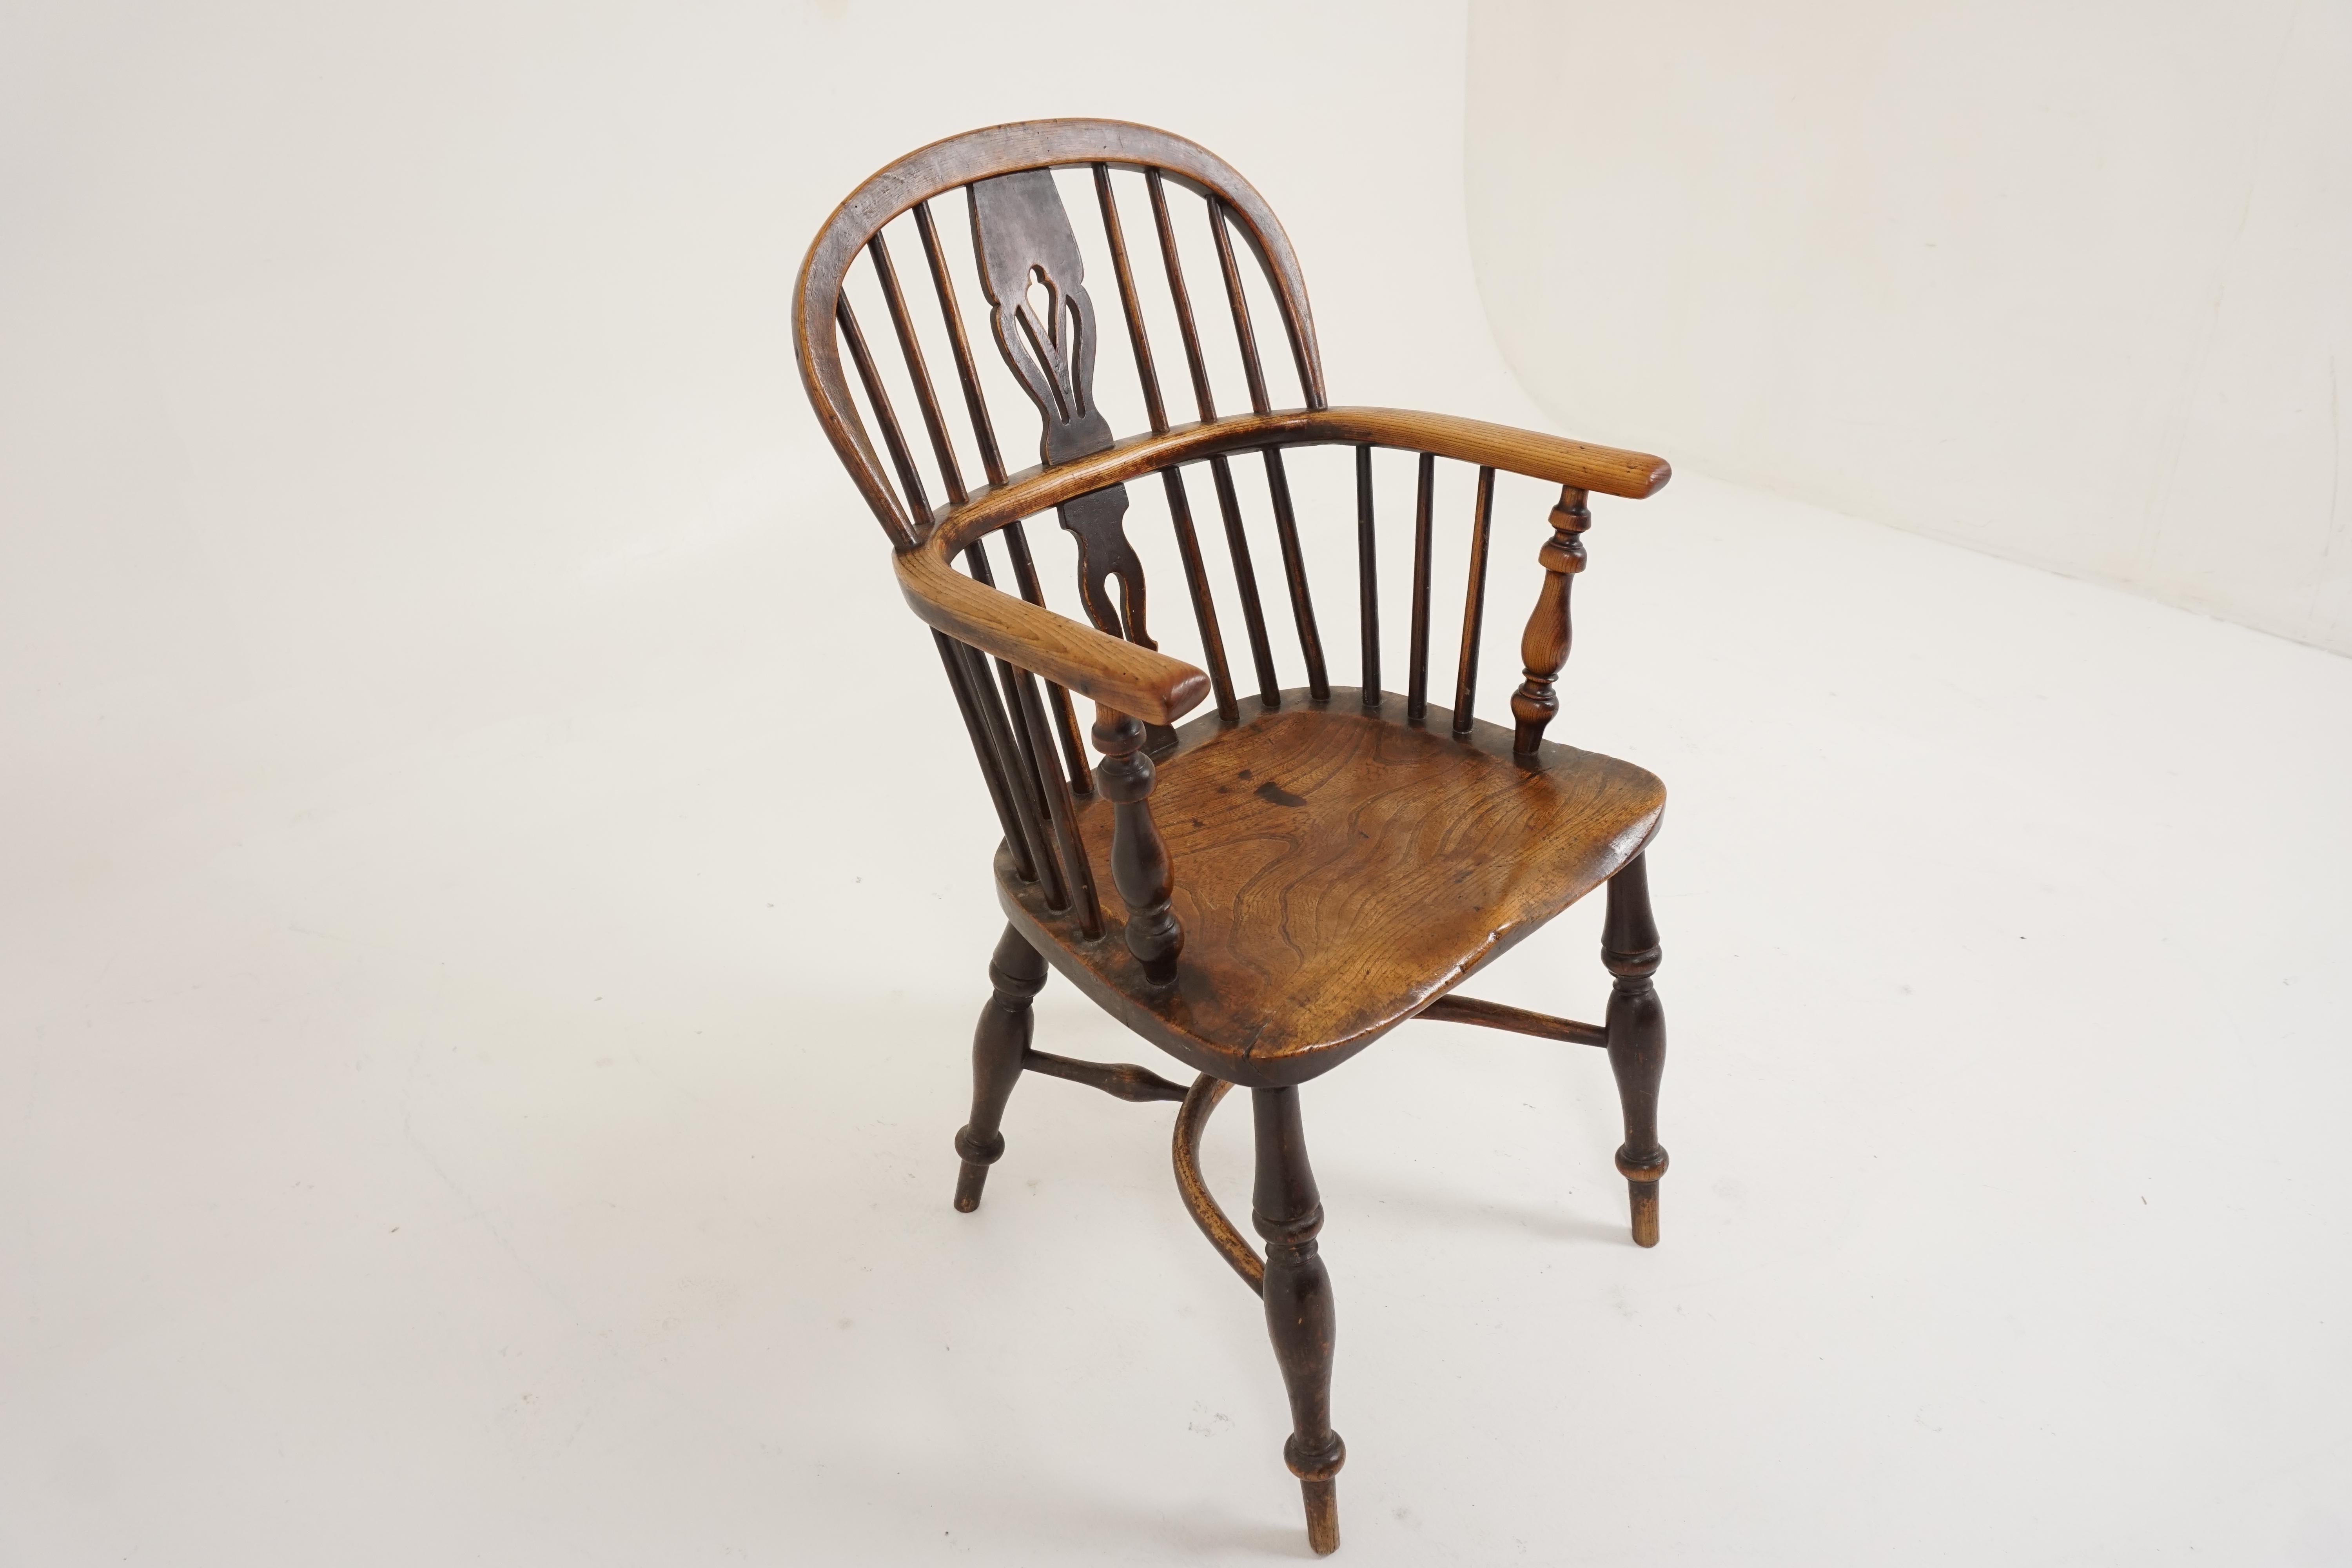 Scottish Antique Windsor Arm Chair, Country Chair, Elm + Yew, Scotland 1850, H544